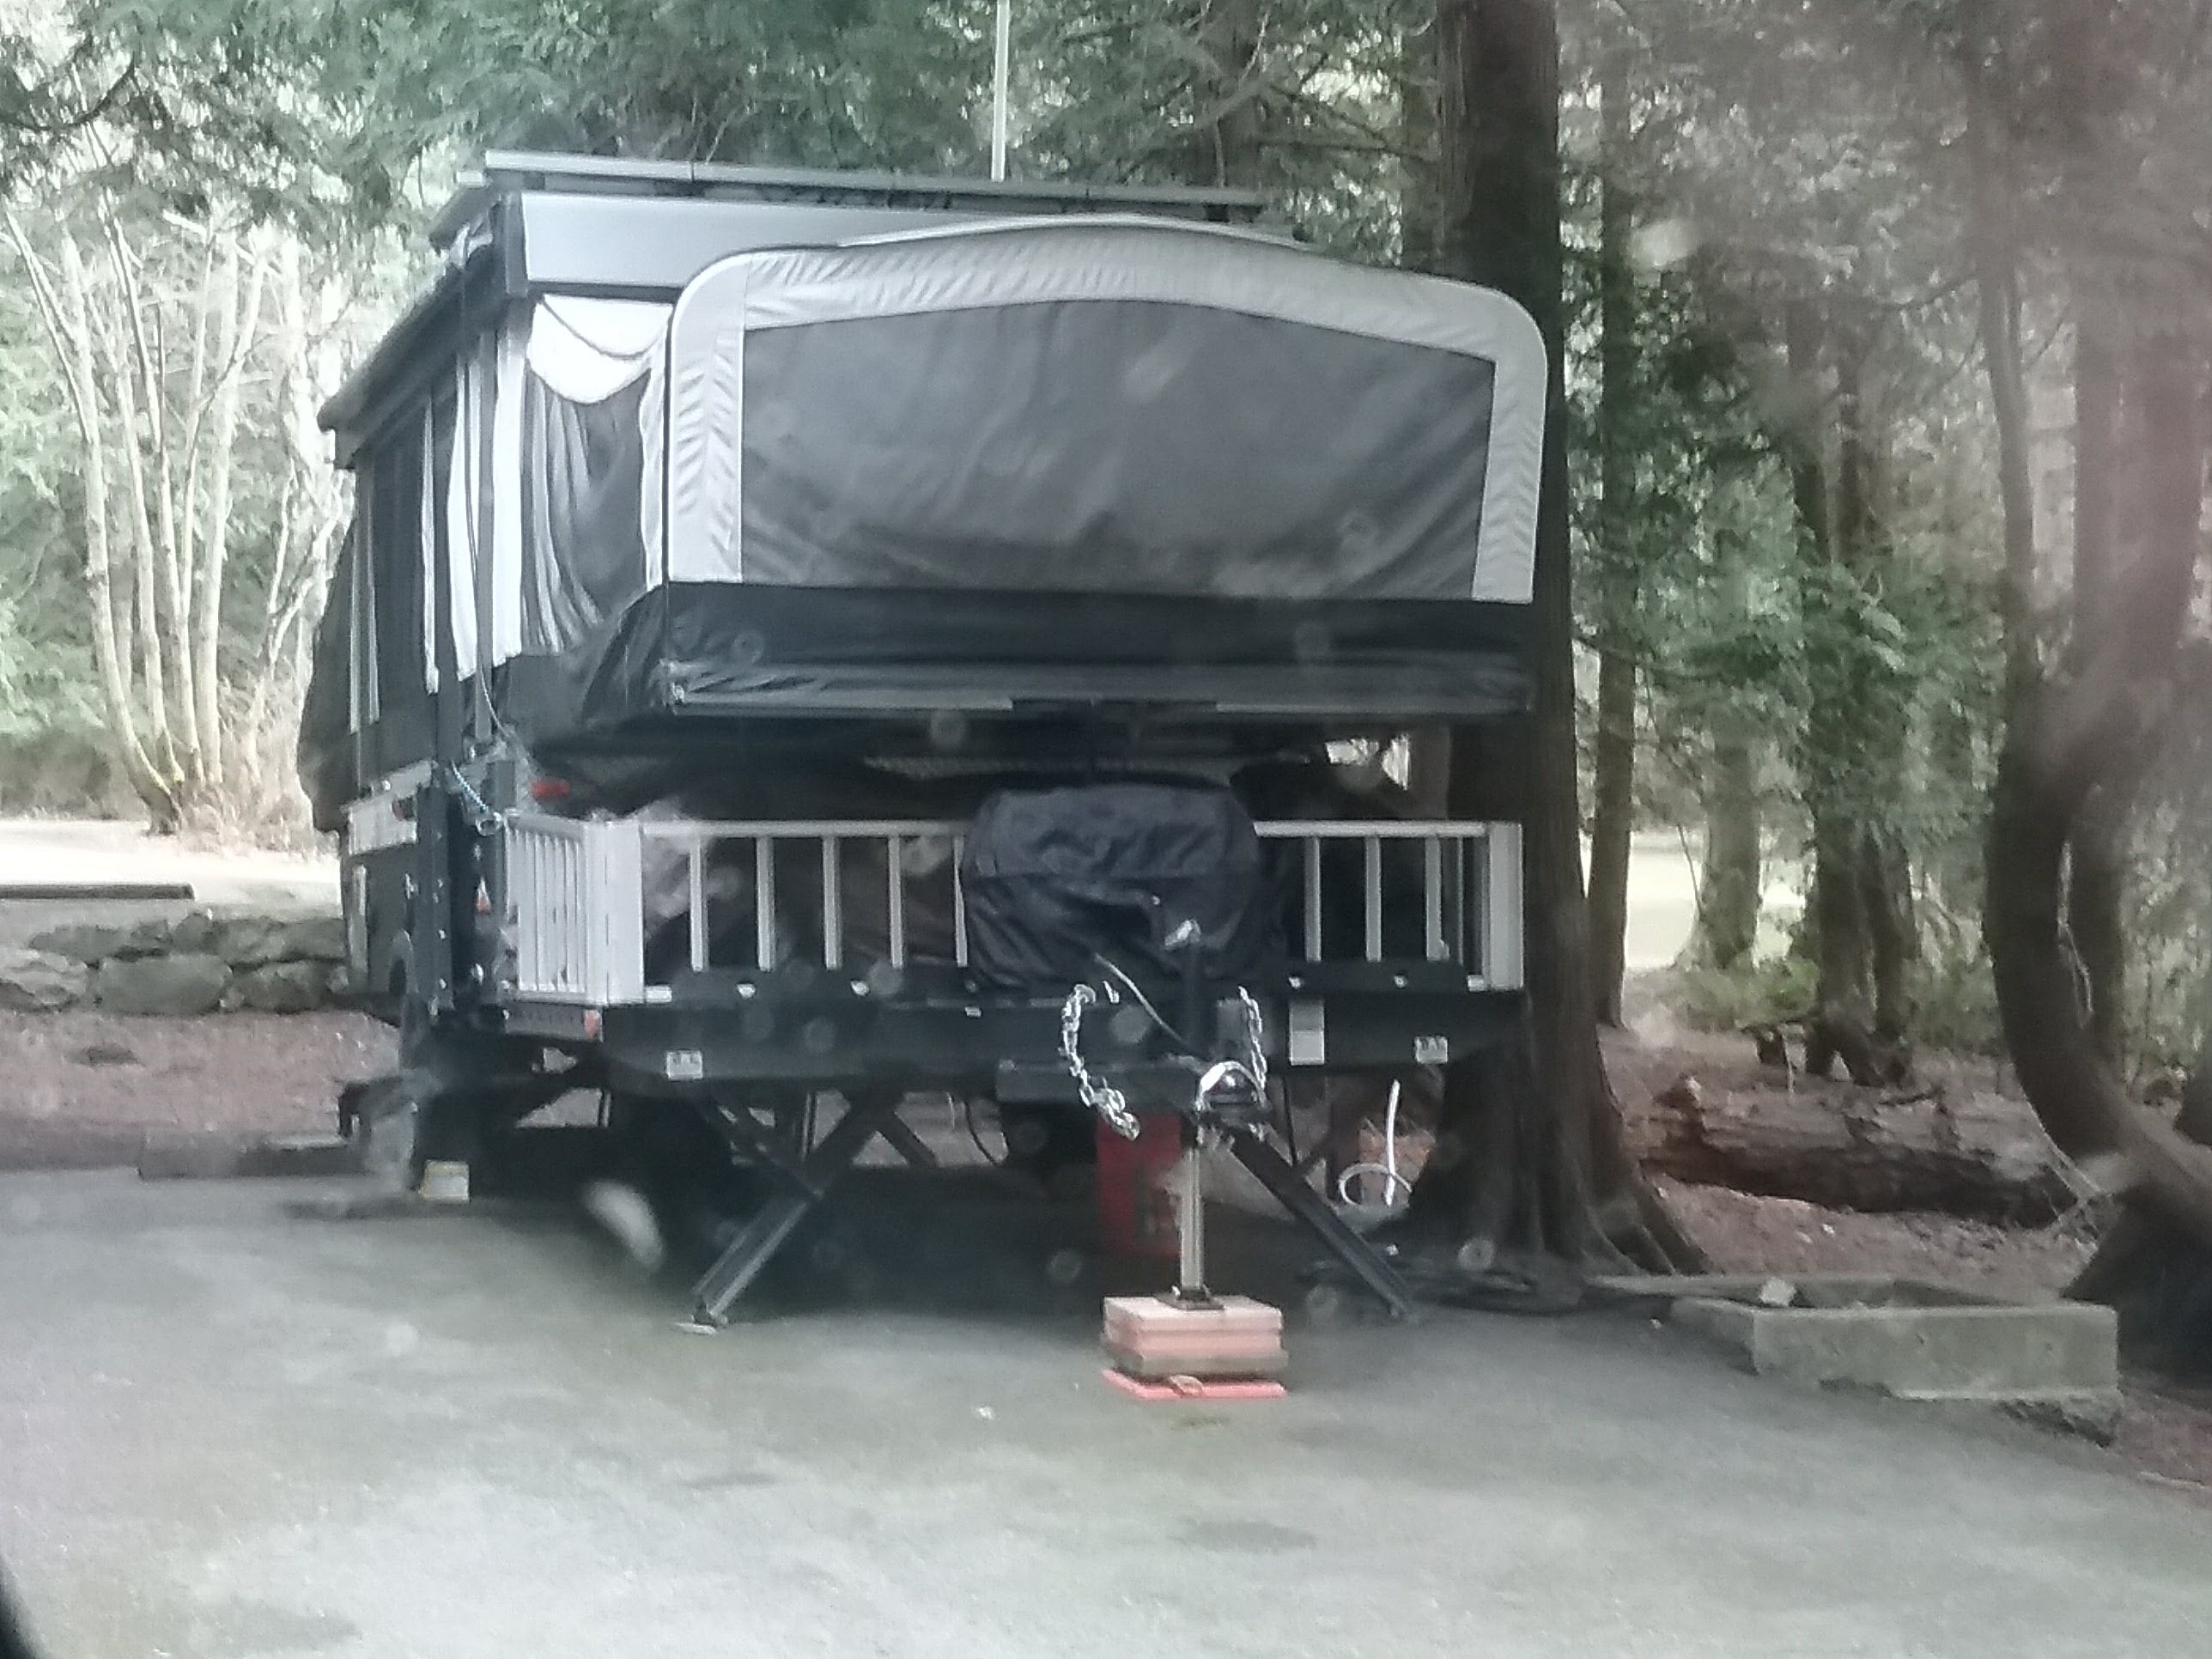 A neighboring site with a rugged off-road pop-up travel trailer